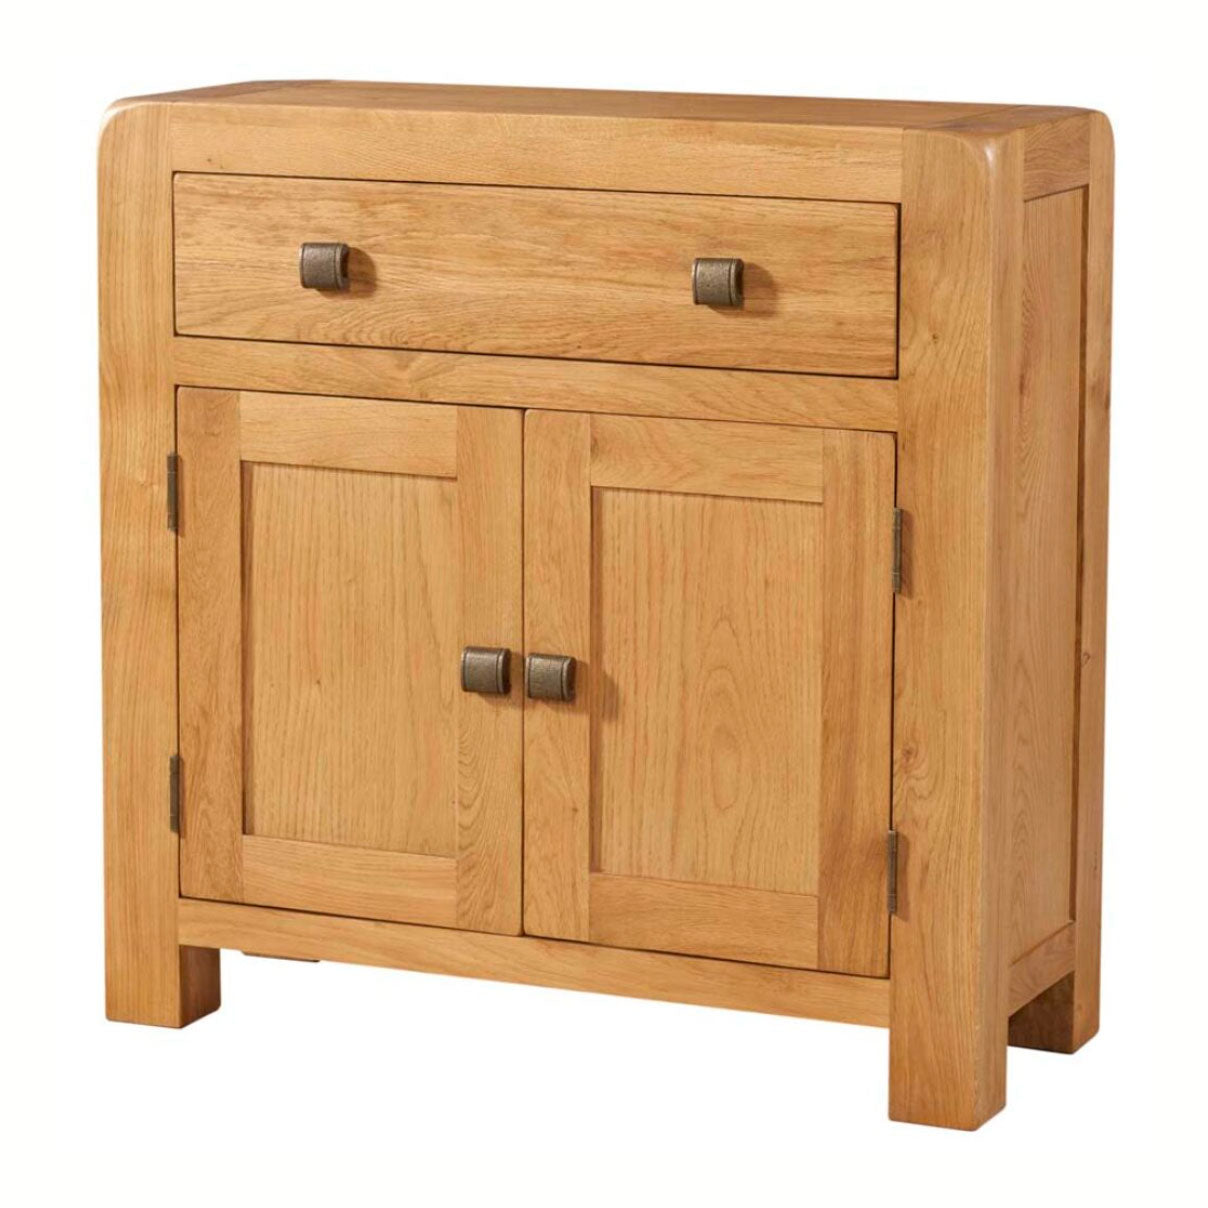 Manor Collection Davenwood Compact Sideboard